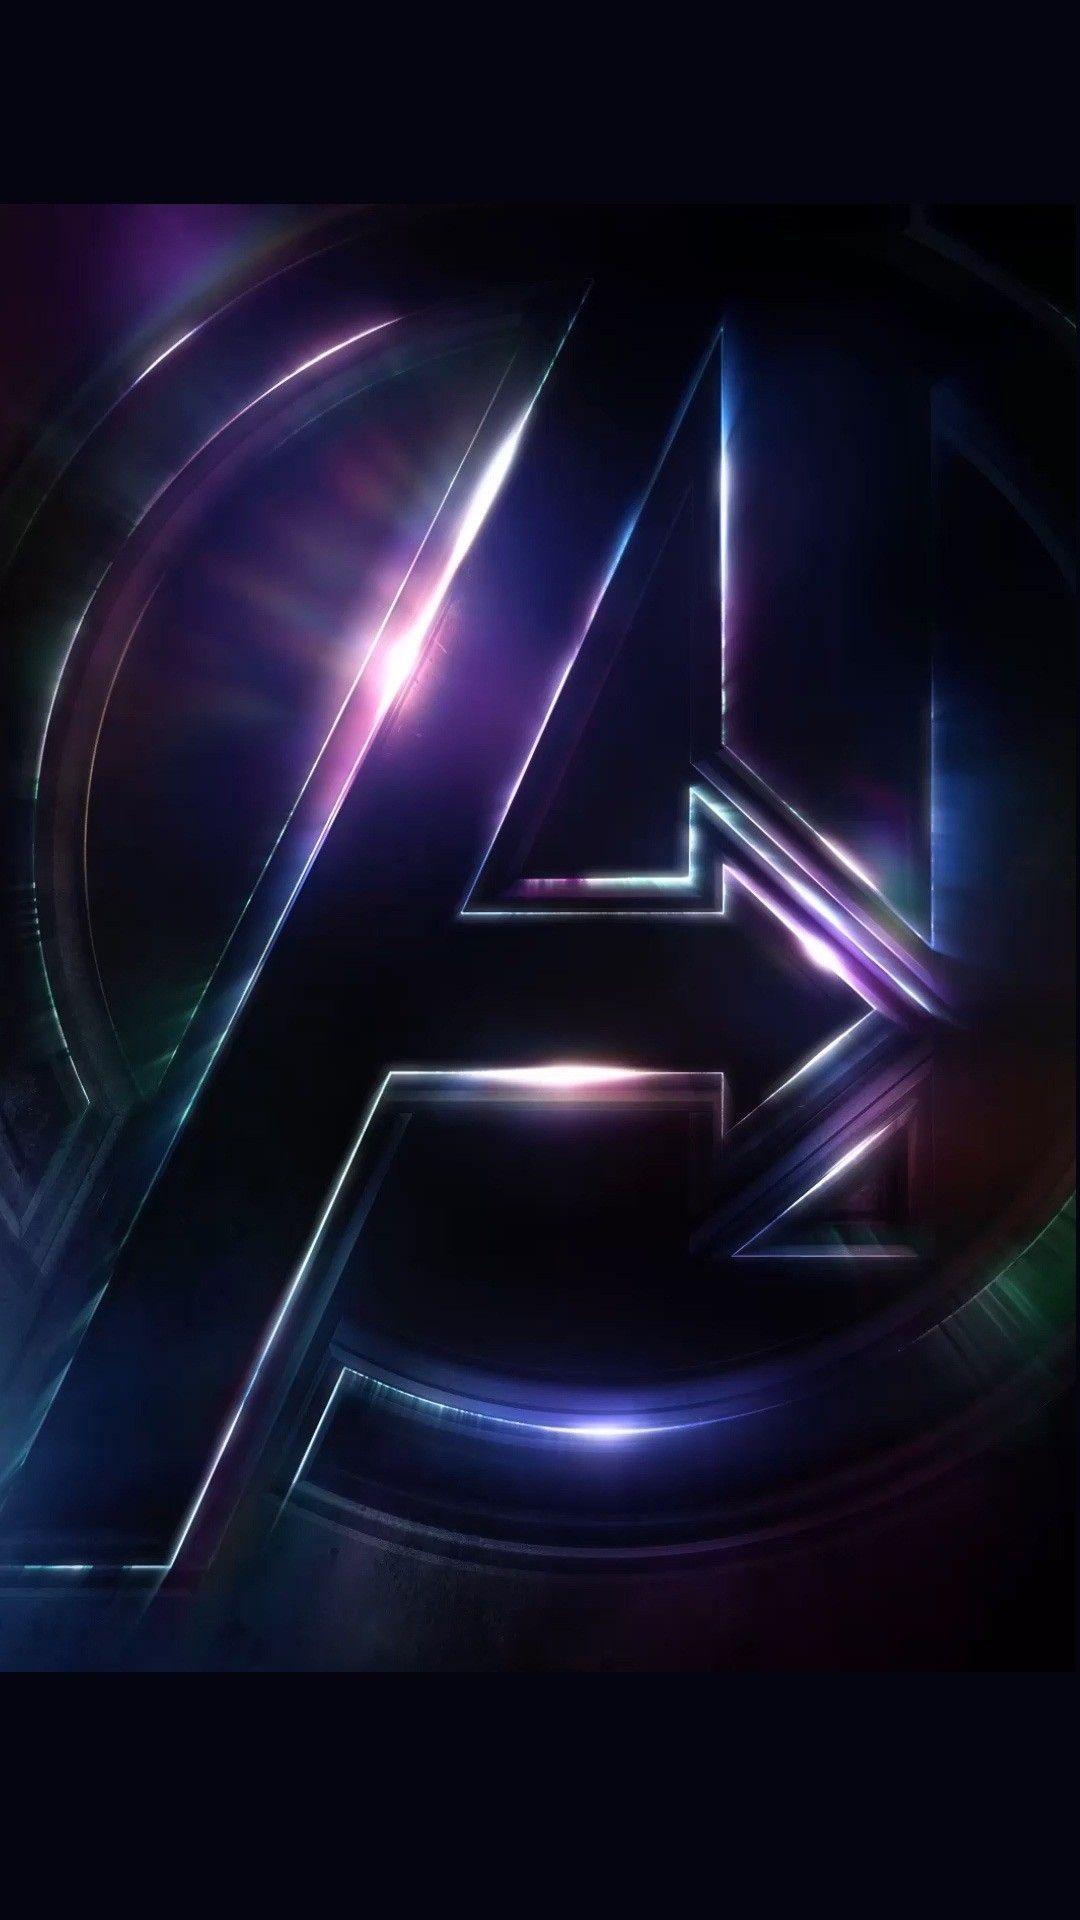 Avengers Infinity War Android Wallpaper. Font